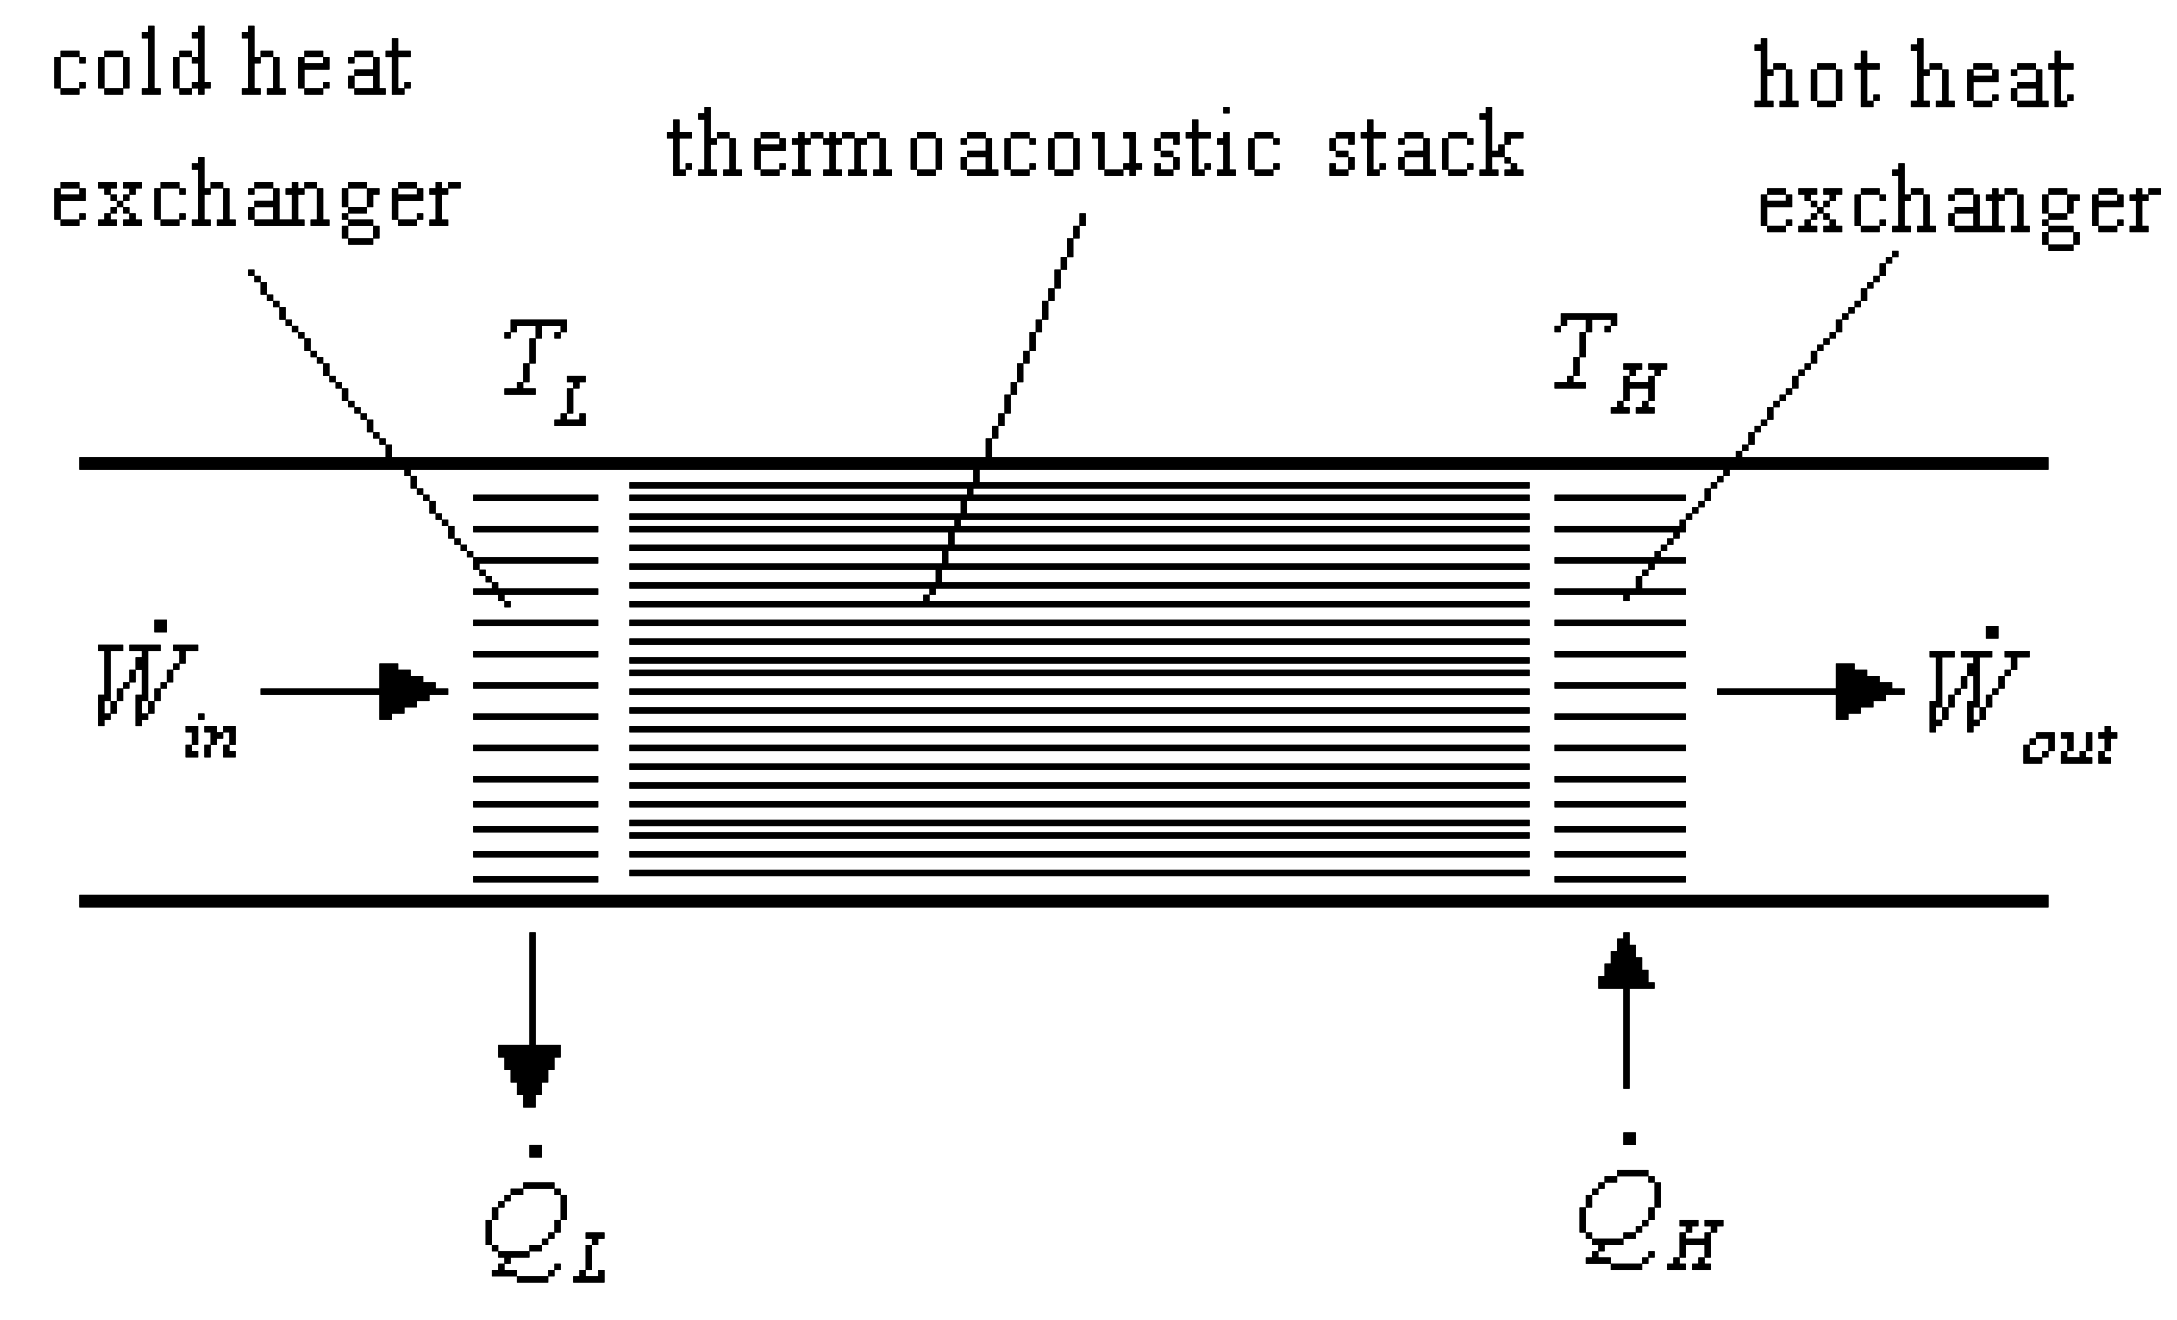 Investigation of mechanical, physical and thermoacoustic